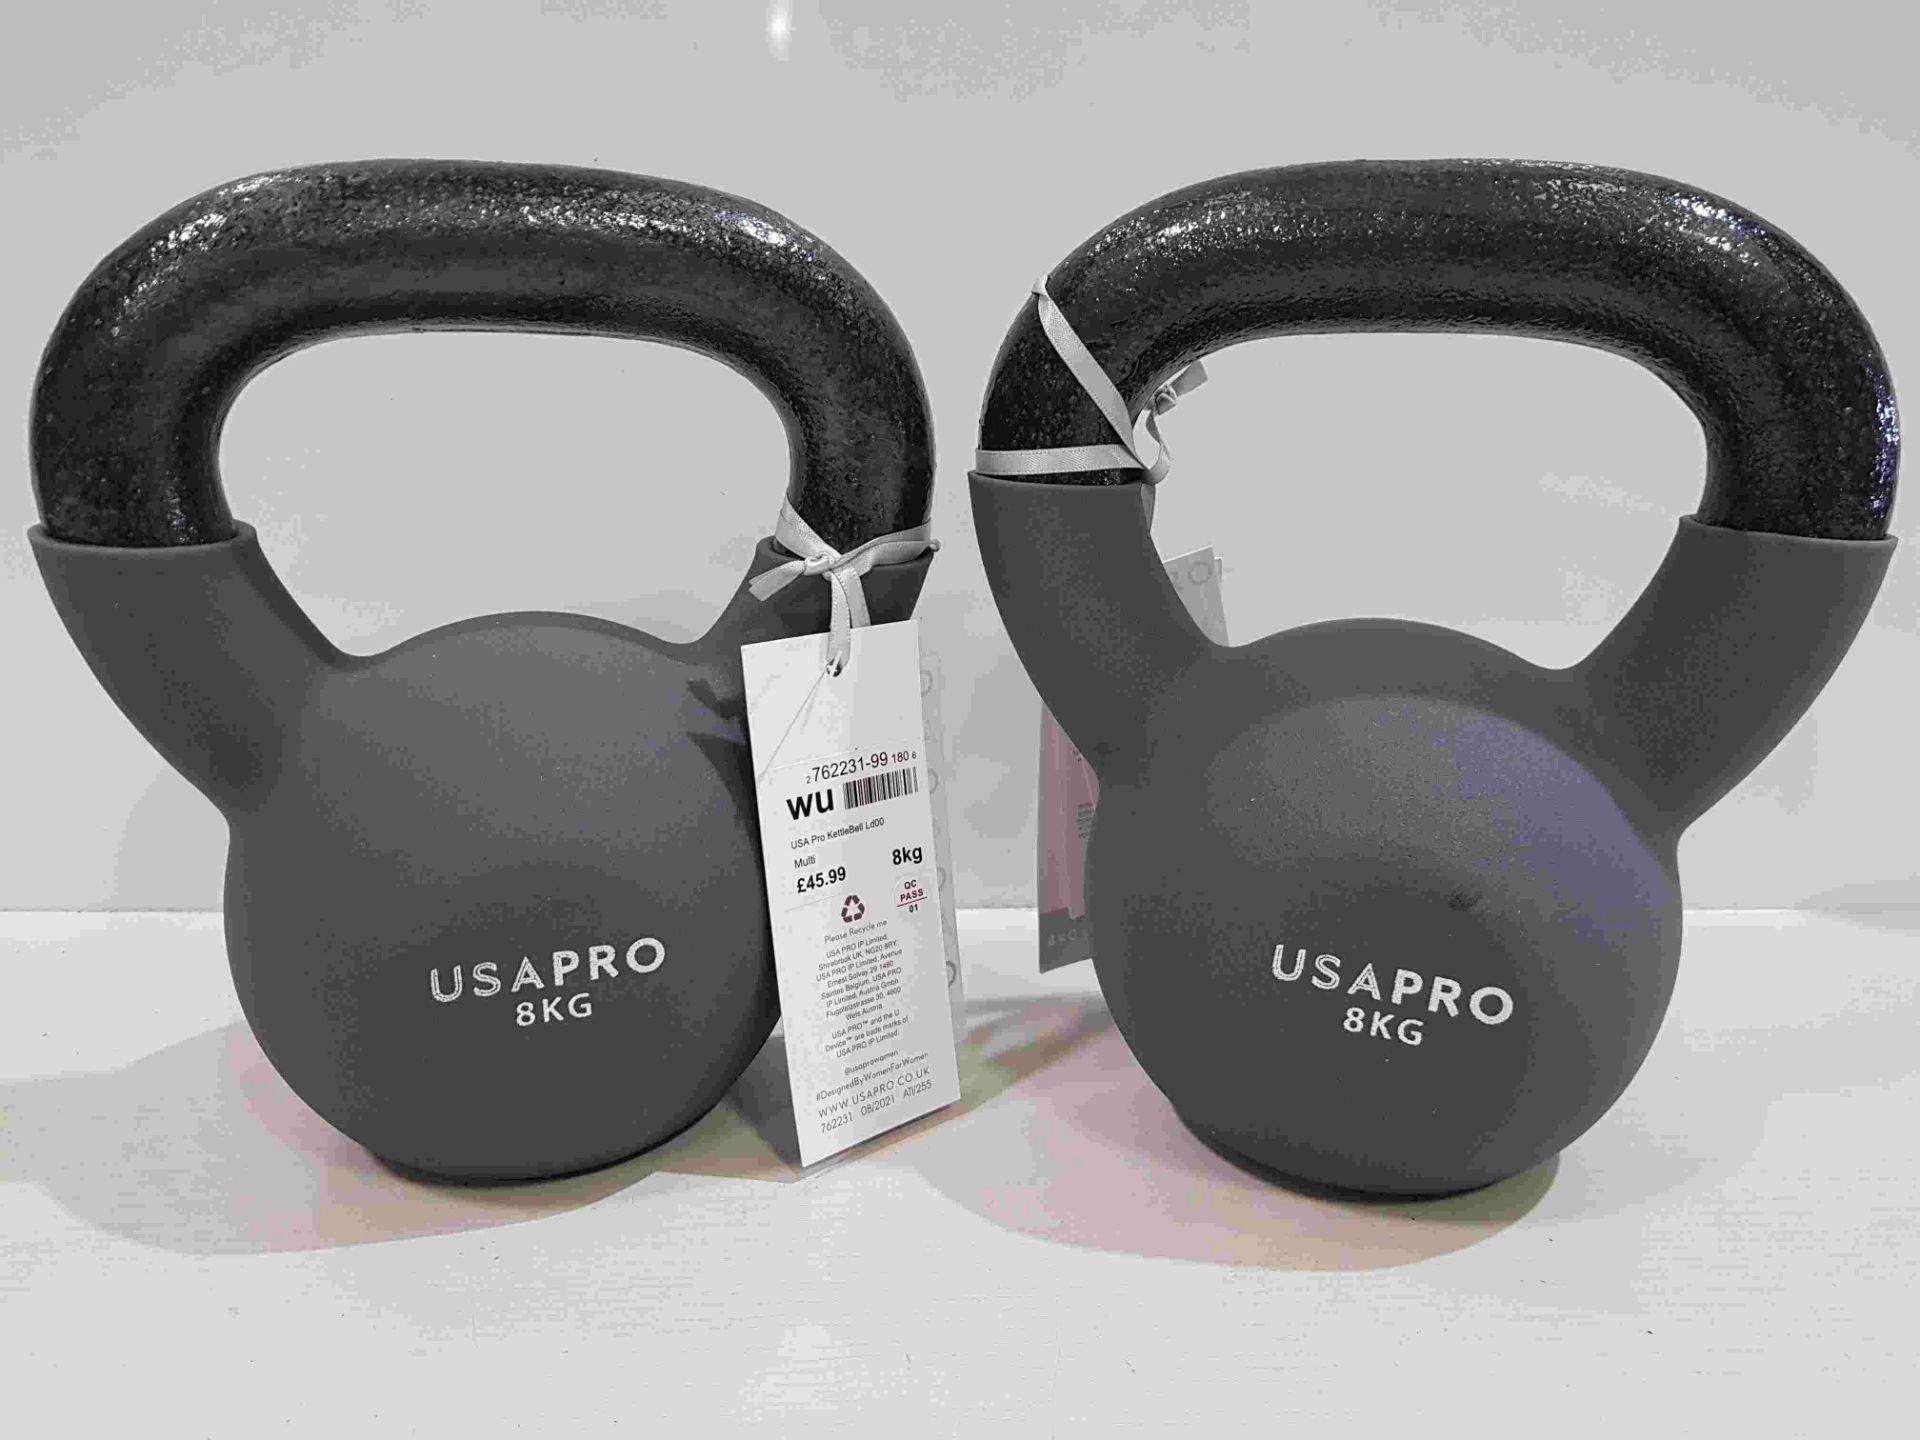 20 X BRAND NEW USA PRO 8 KG KETTLEBELLS ( 10 PAIRS ) - RRP £ 45.99PP - £ TOTAL RRP £ 919.80 - IN